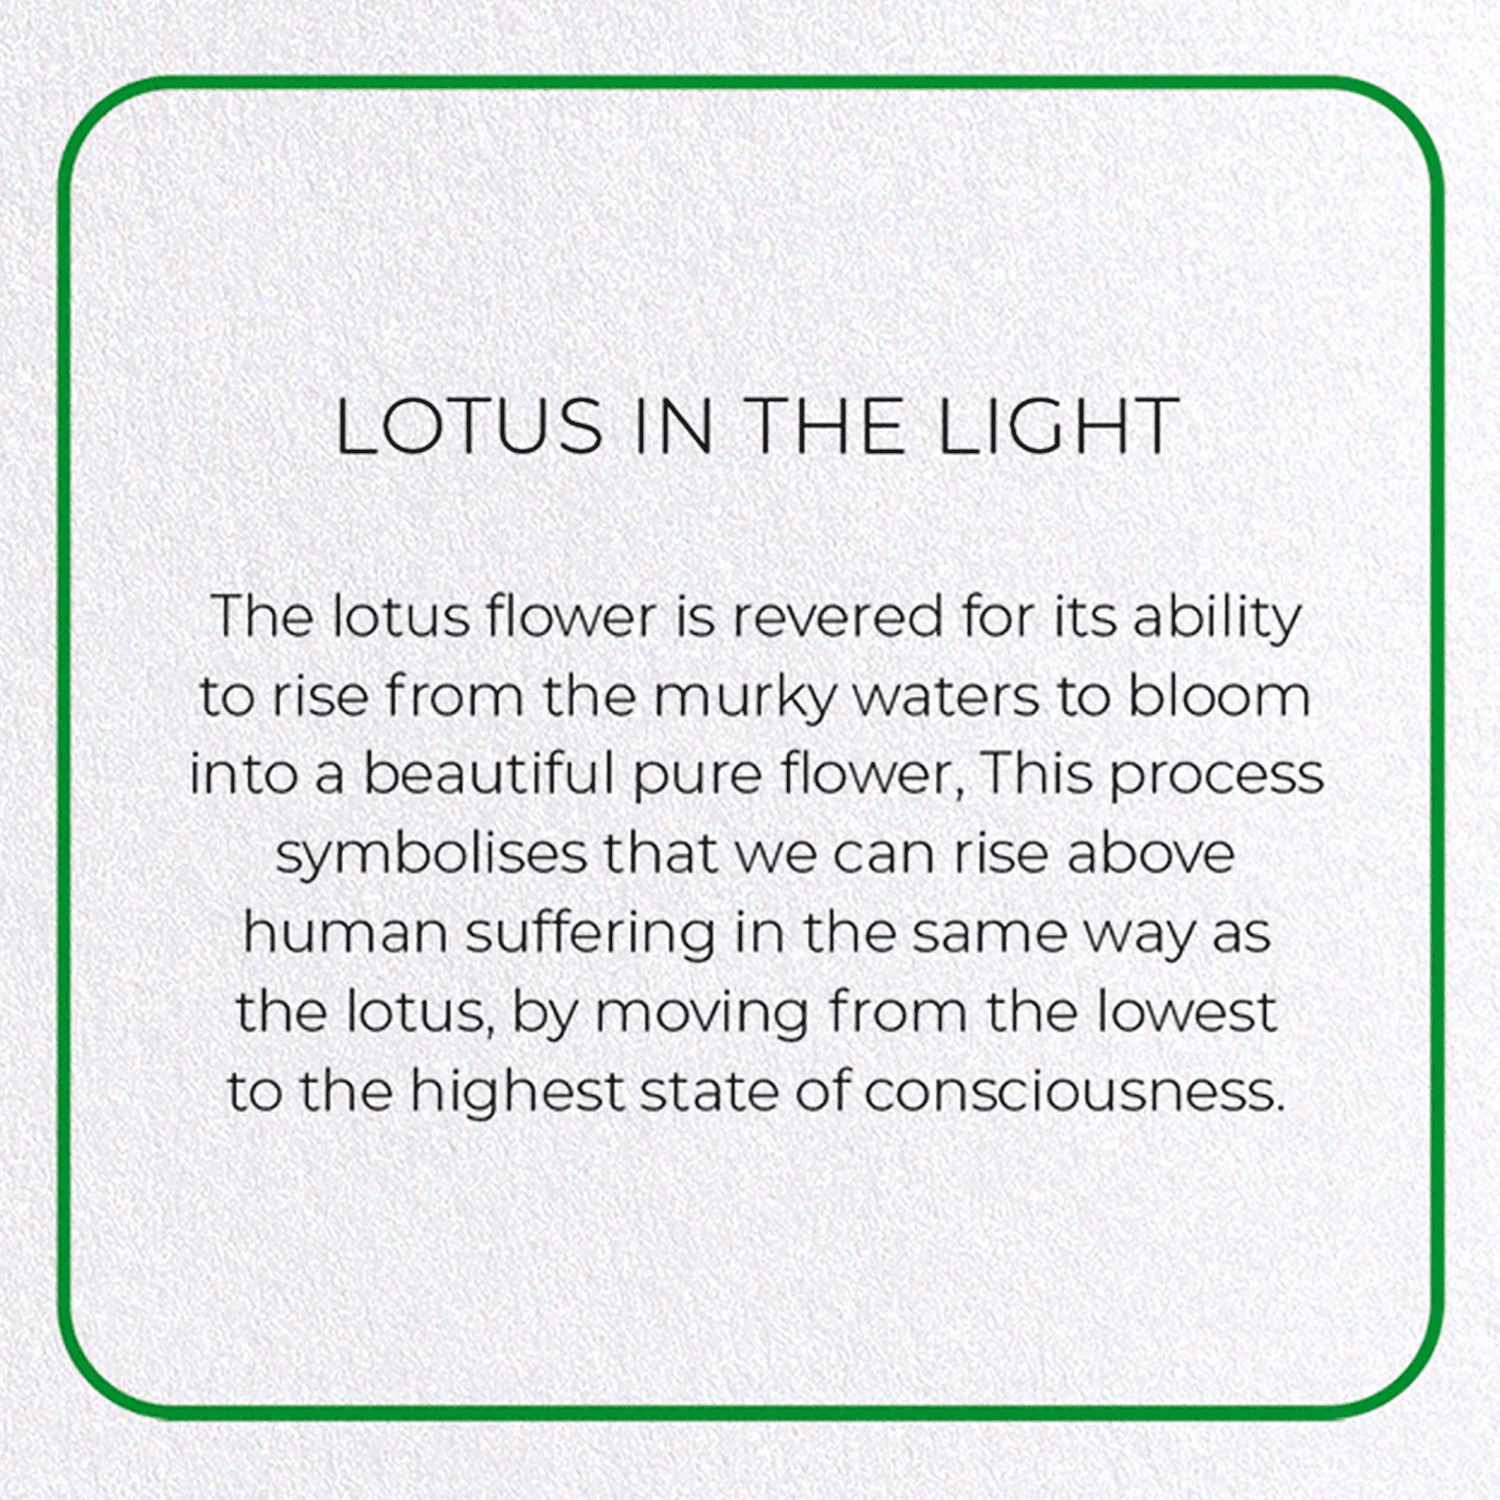 LOTUS IN THE LIGHT